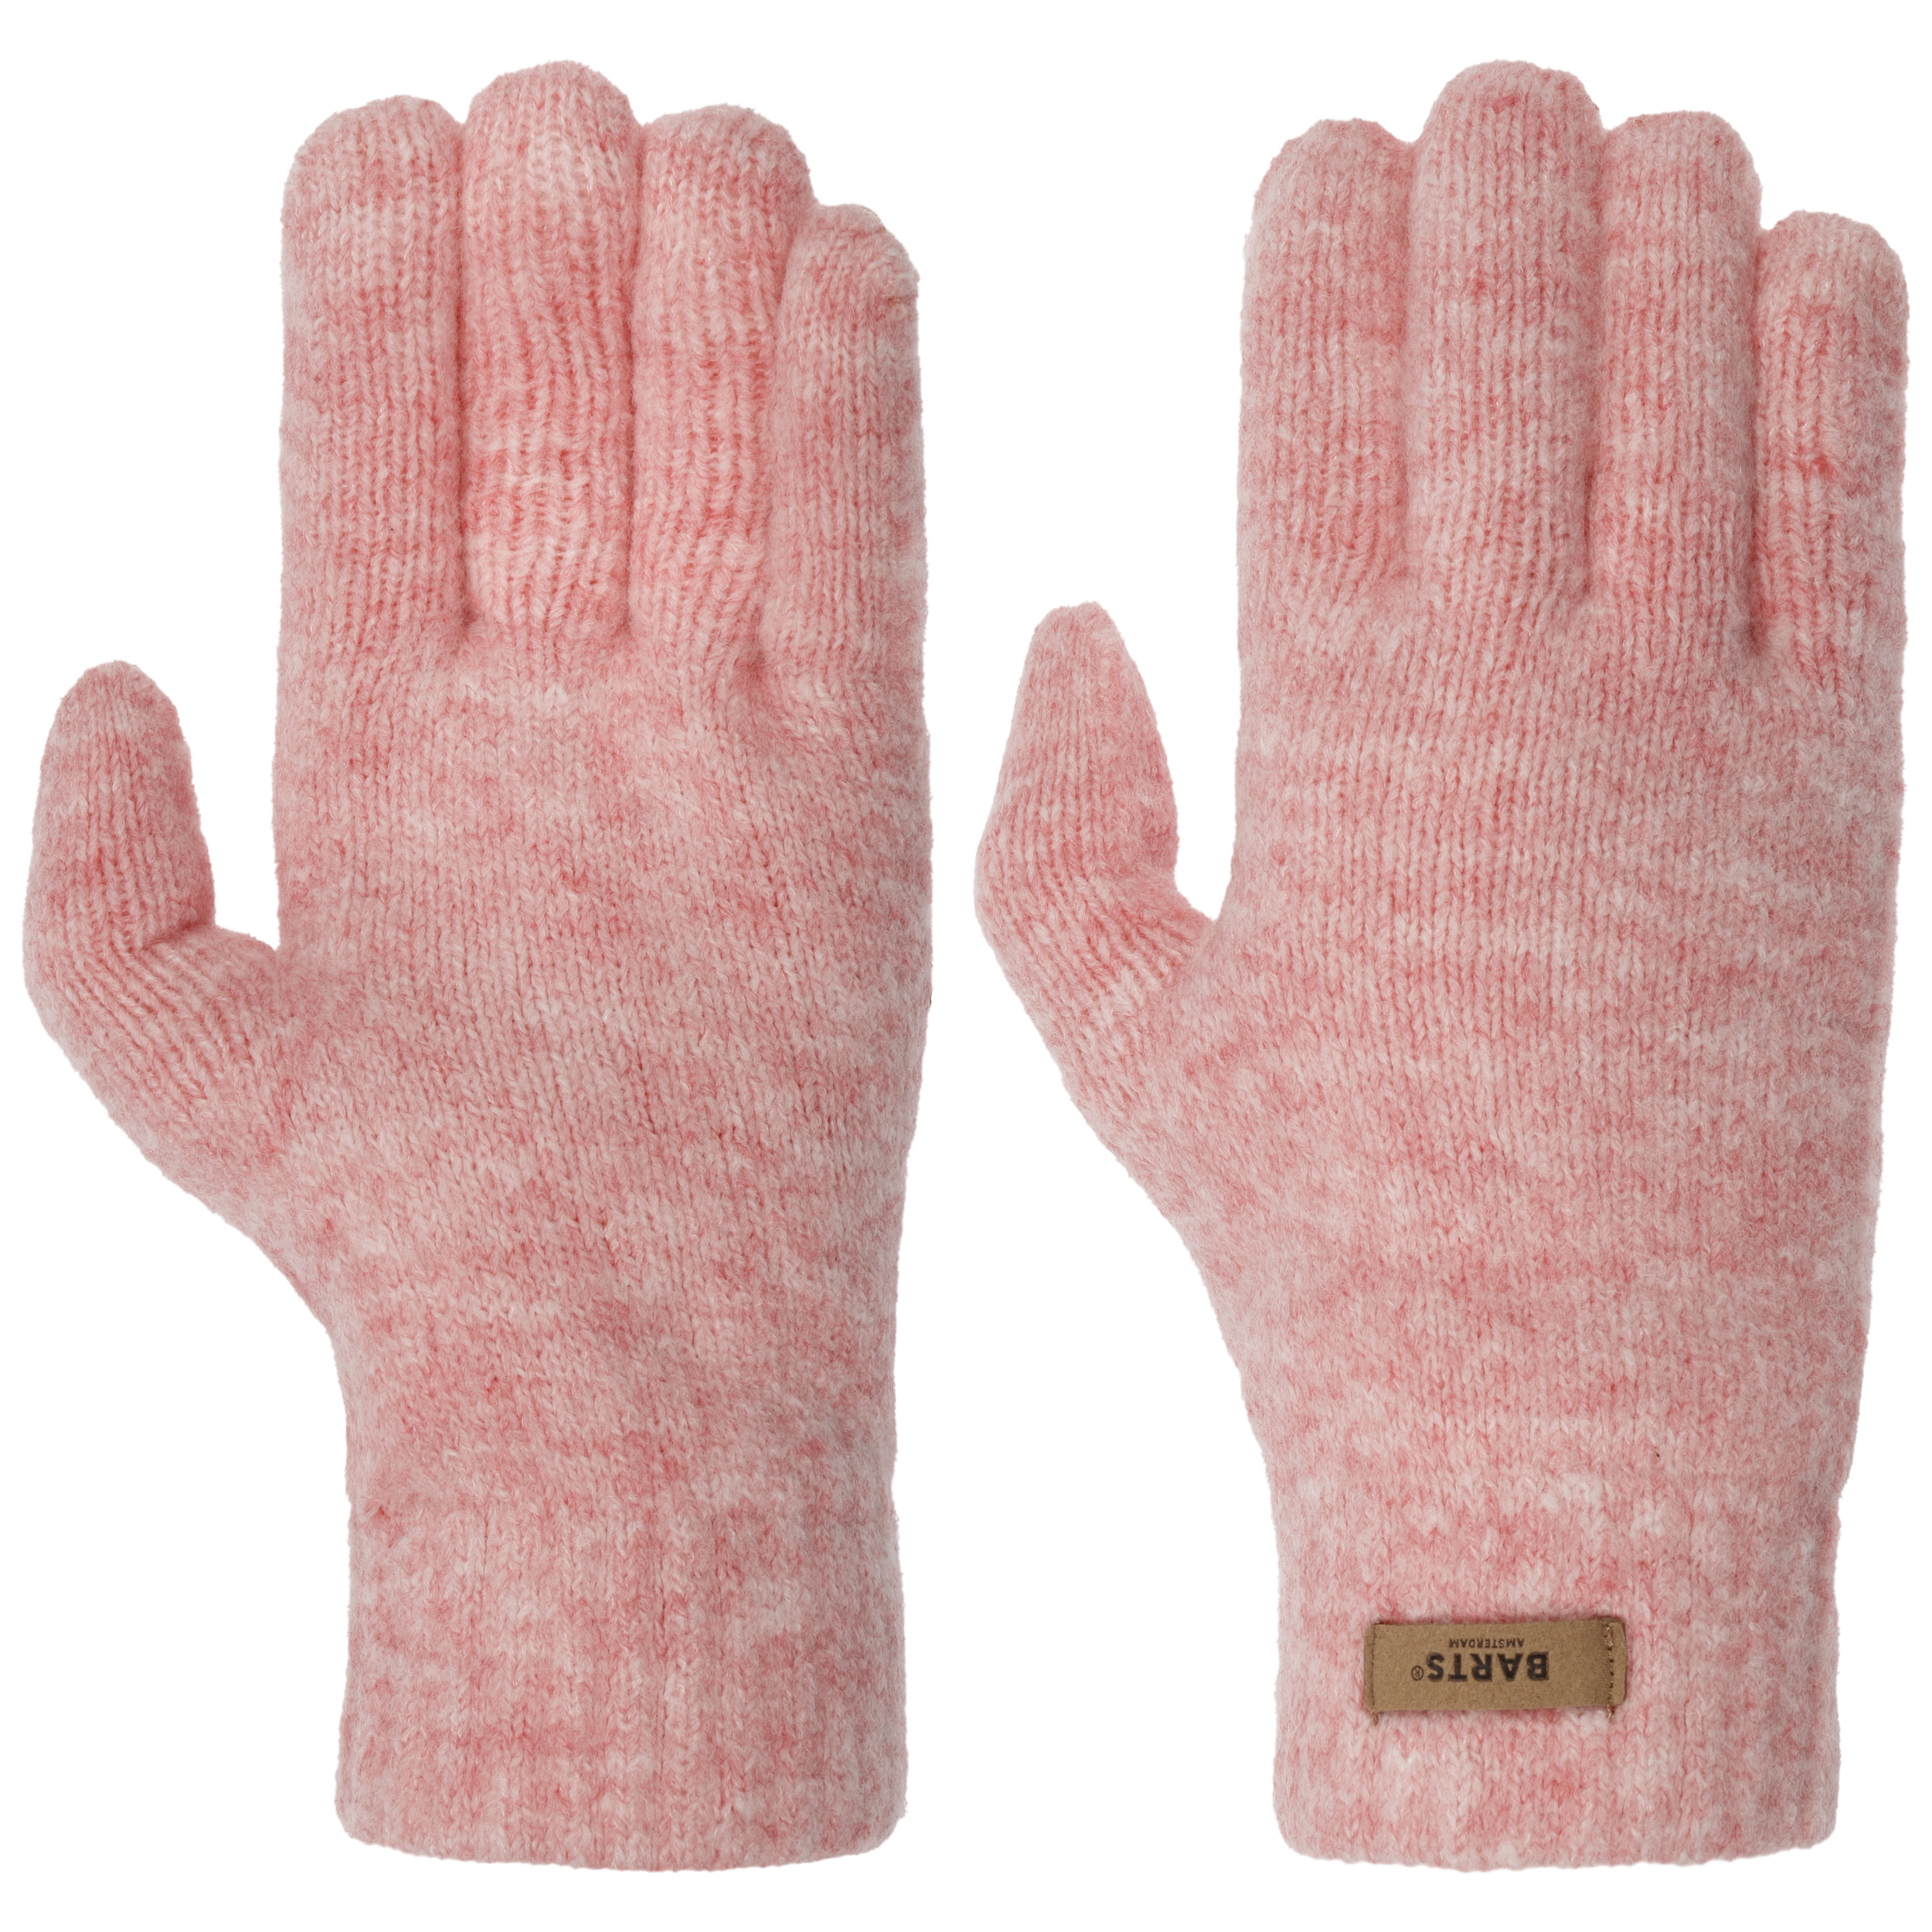 Witzia Gloves with Teddy Lining by Barts - 26,95